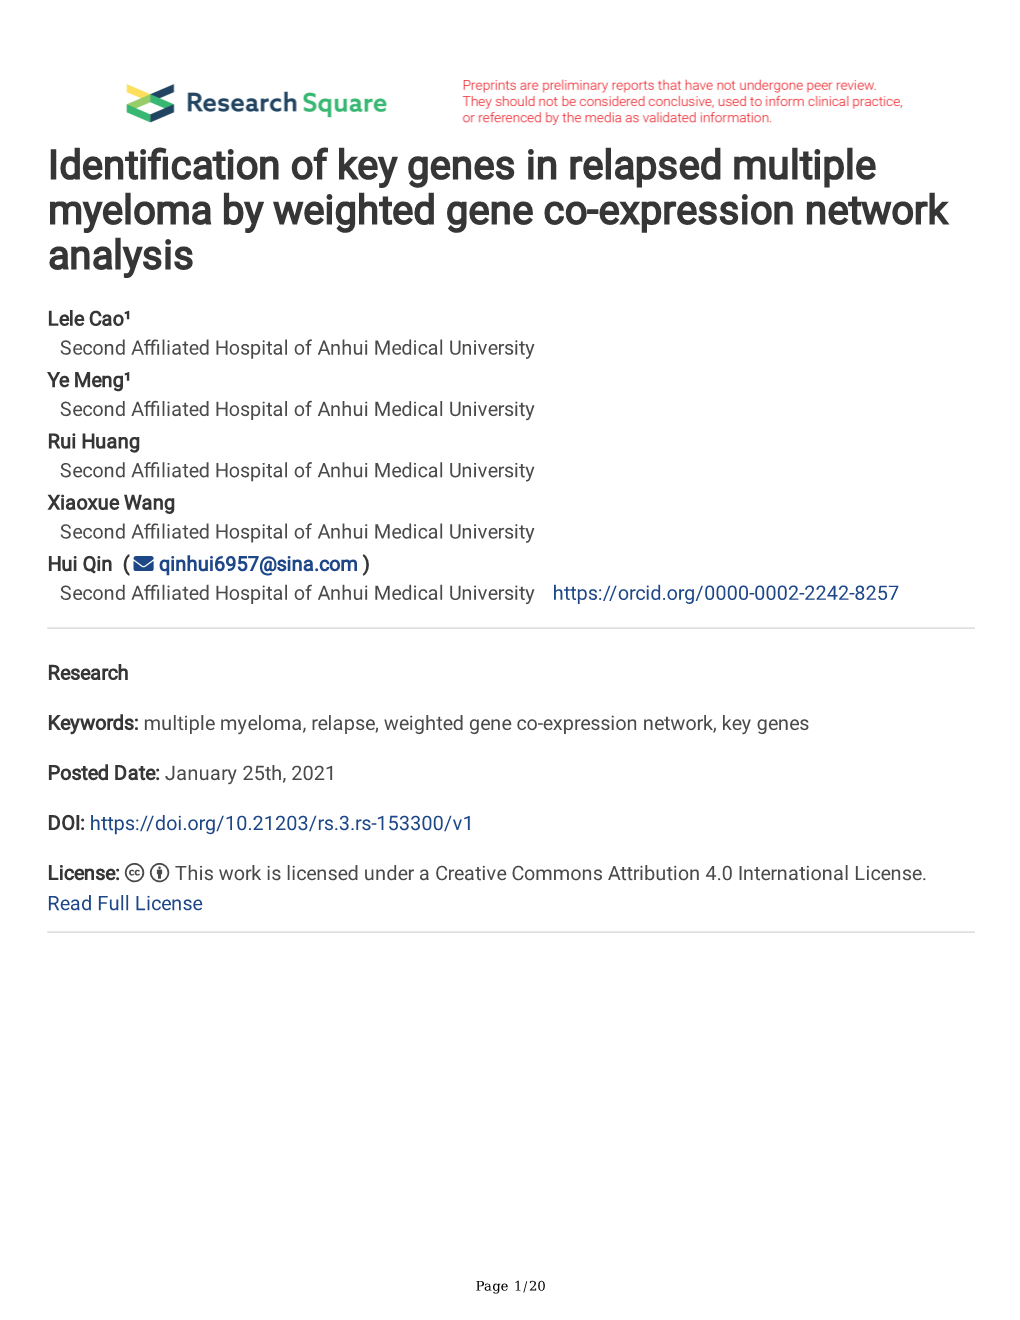 Identi Cation of Key Genes in Relapsed Multiple Myeloma by Weighted Gene Co-Expression Network Analysis